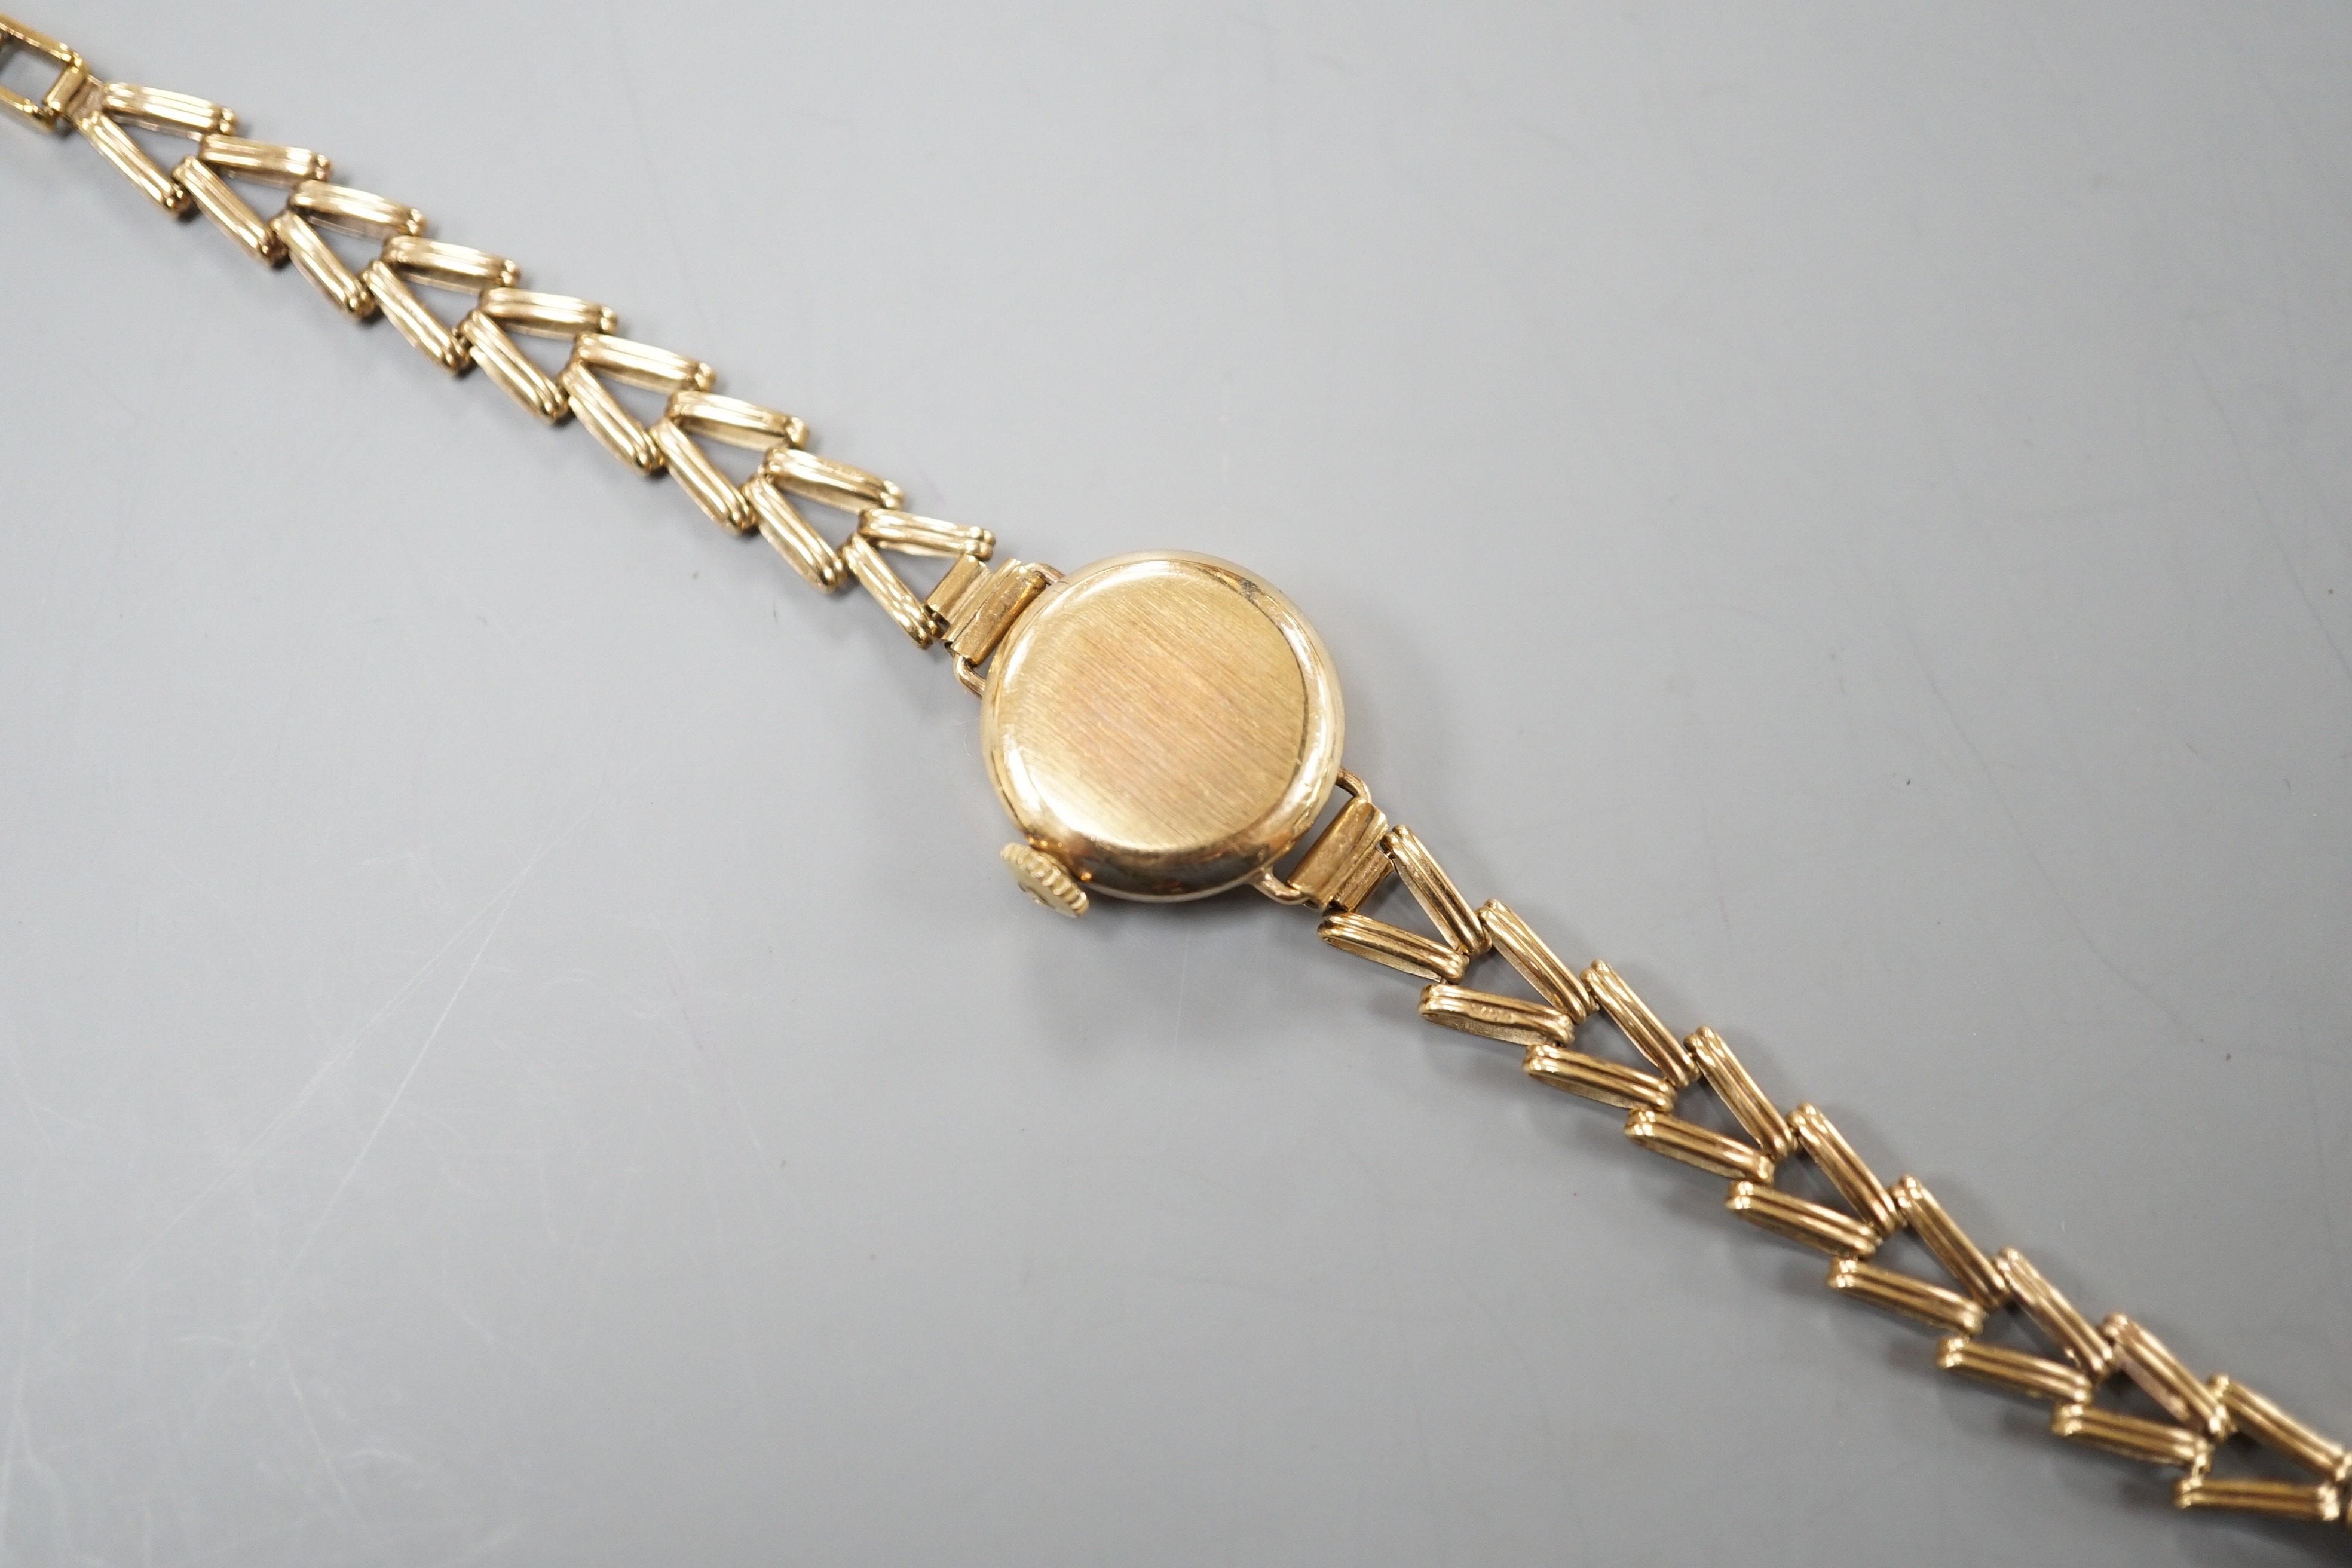 A lady's 9ct gold Tissot manual wind wrist watch, on a 9ct gold bracelet, overall length 16.25cm, gross weight 11.2 grams.